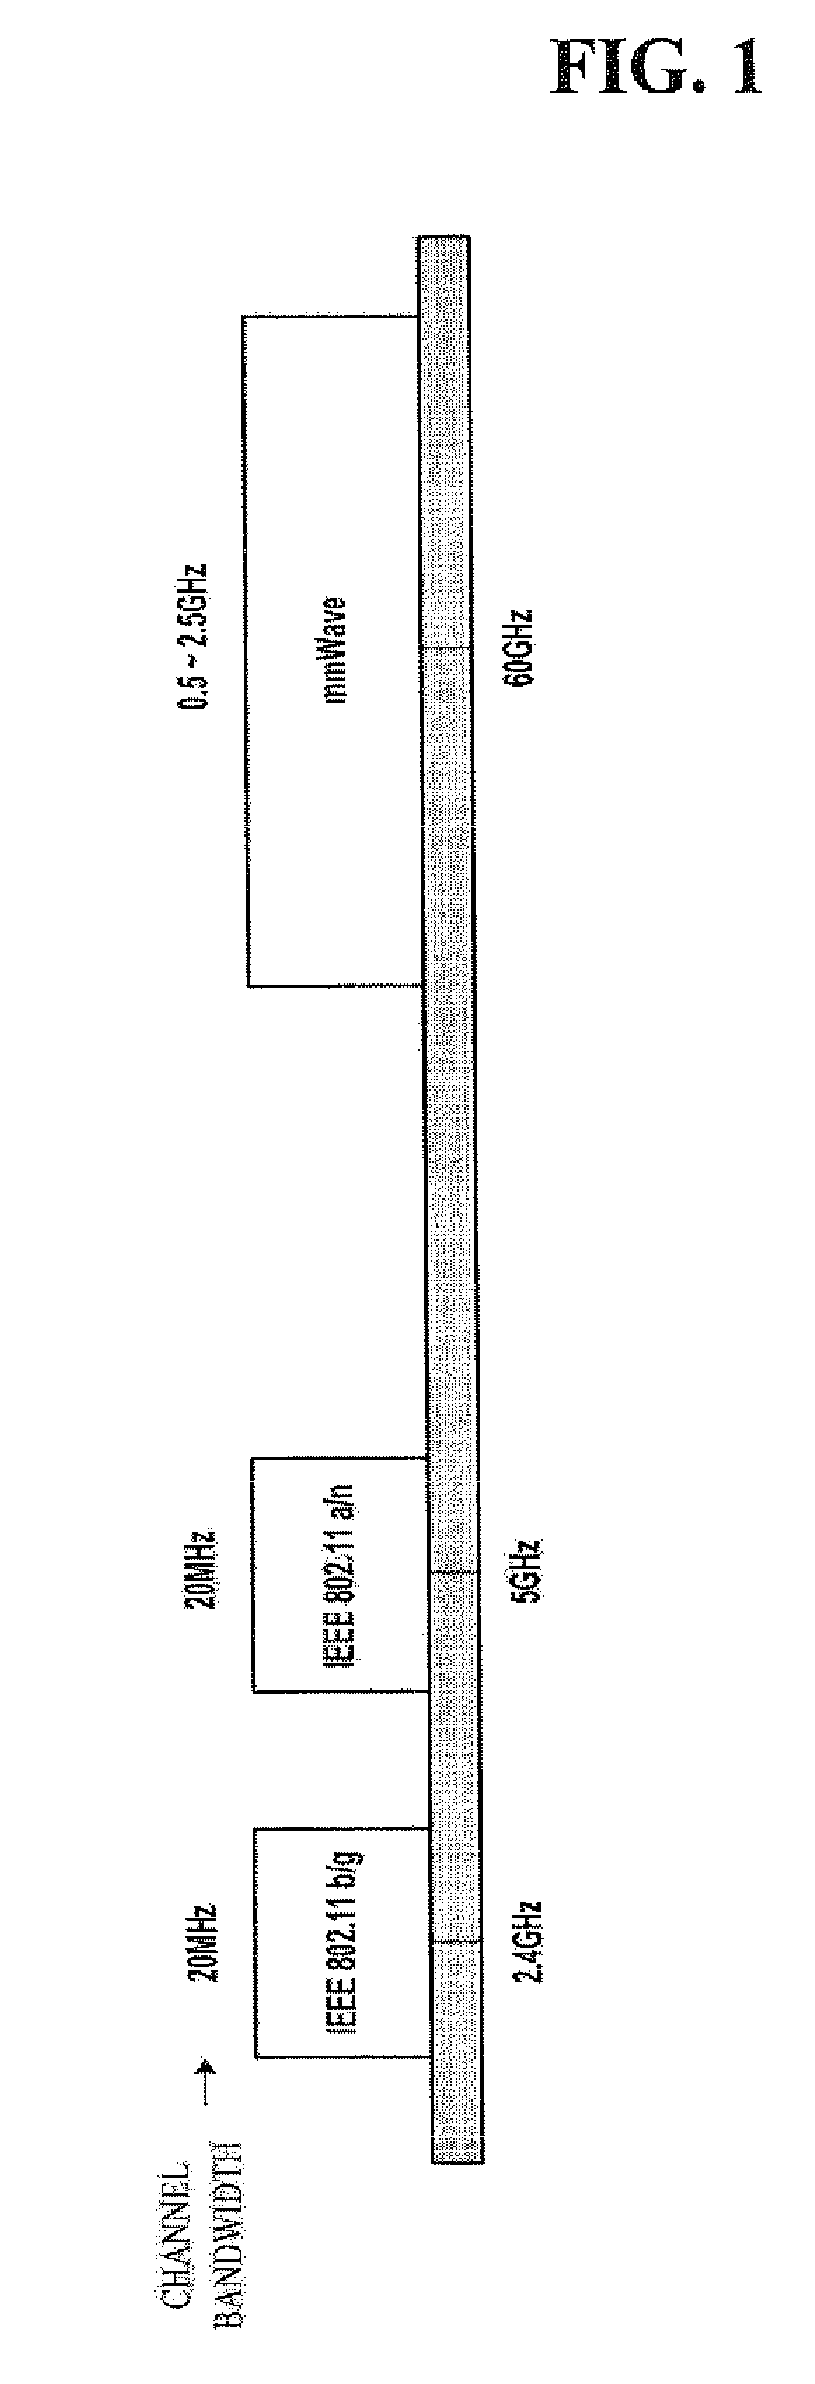 Channel allocation management method for transferring uncompressed isochronous data, uncompressed isochronous data transferring method and apparatus thereof